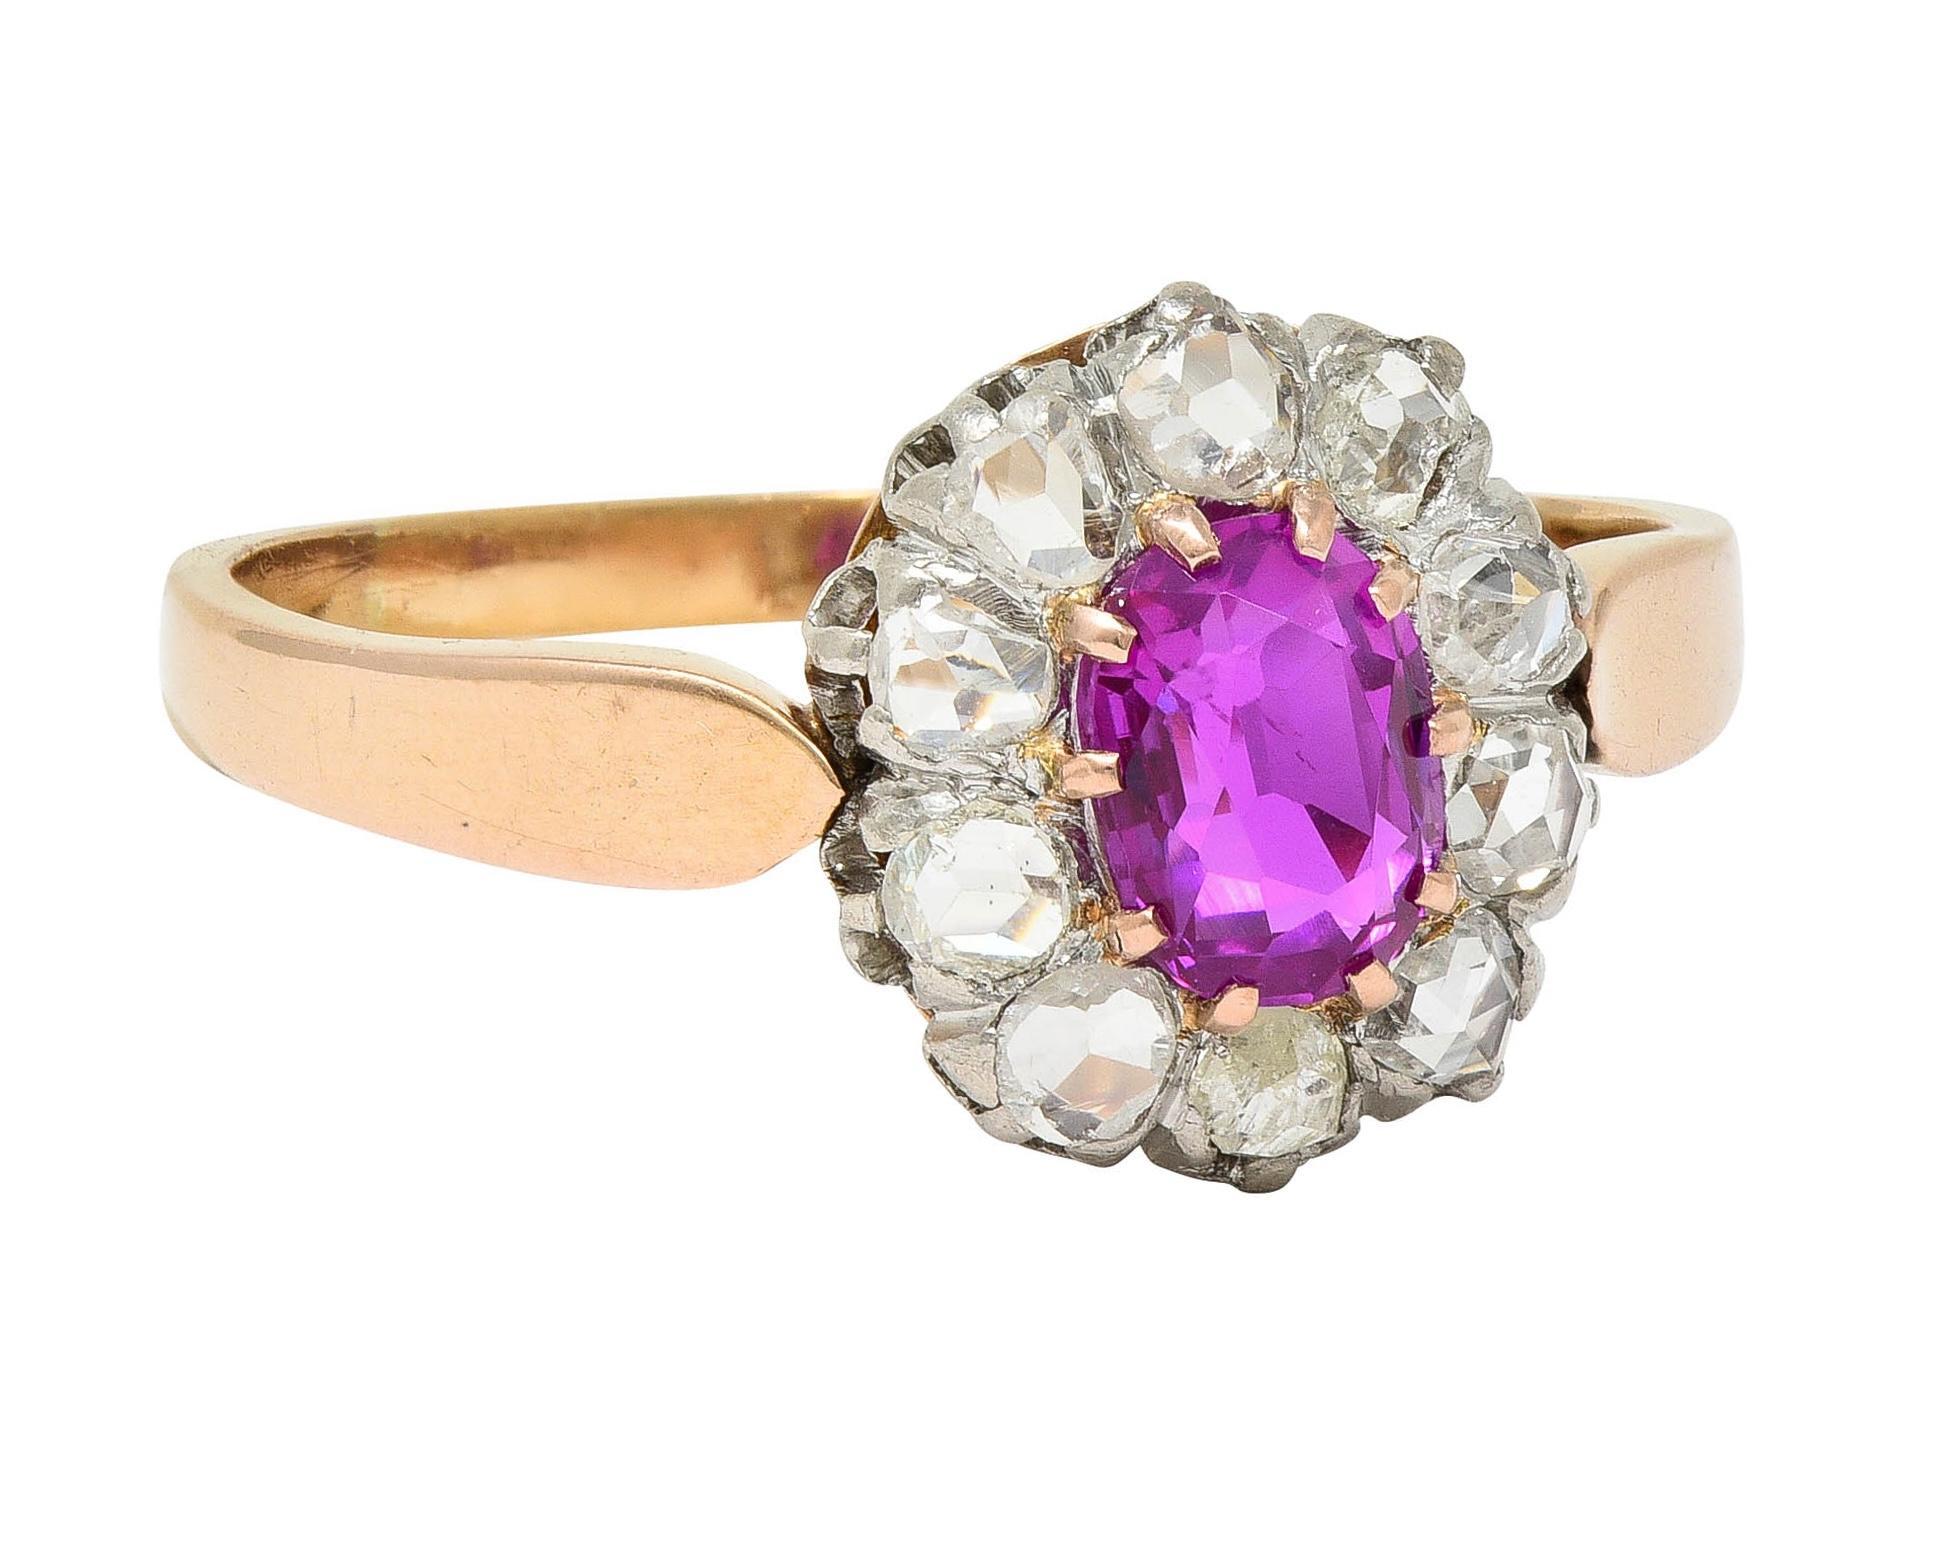 Centering an oval cut sapphire weighing 1.00 carat - transparent medium purple-pink in color 
Natural Burmese in origin with no indications of heat treatment 
Prong set in platinum-topped head with a halo surround of rose cut diamonds 
Weighing